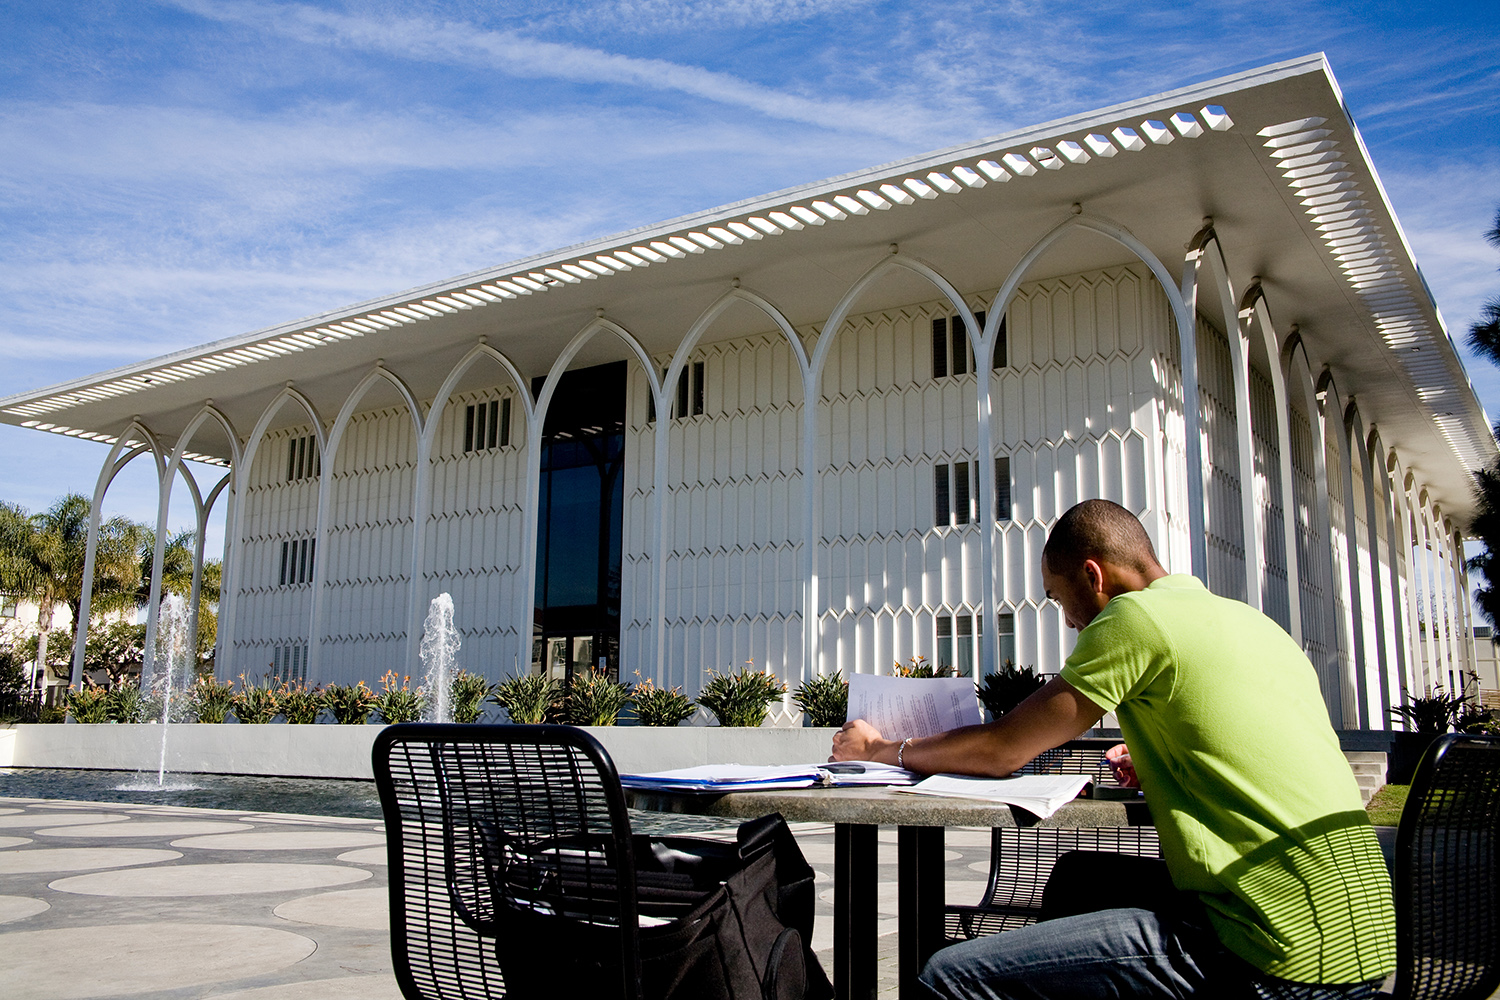 A student sitting at a table in front of an academic building